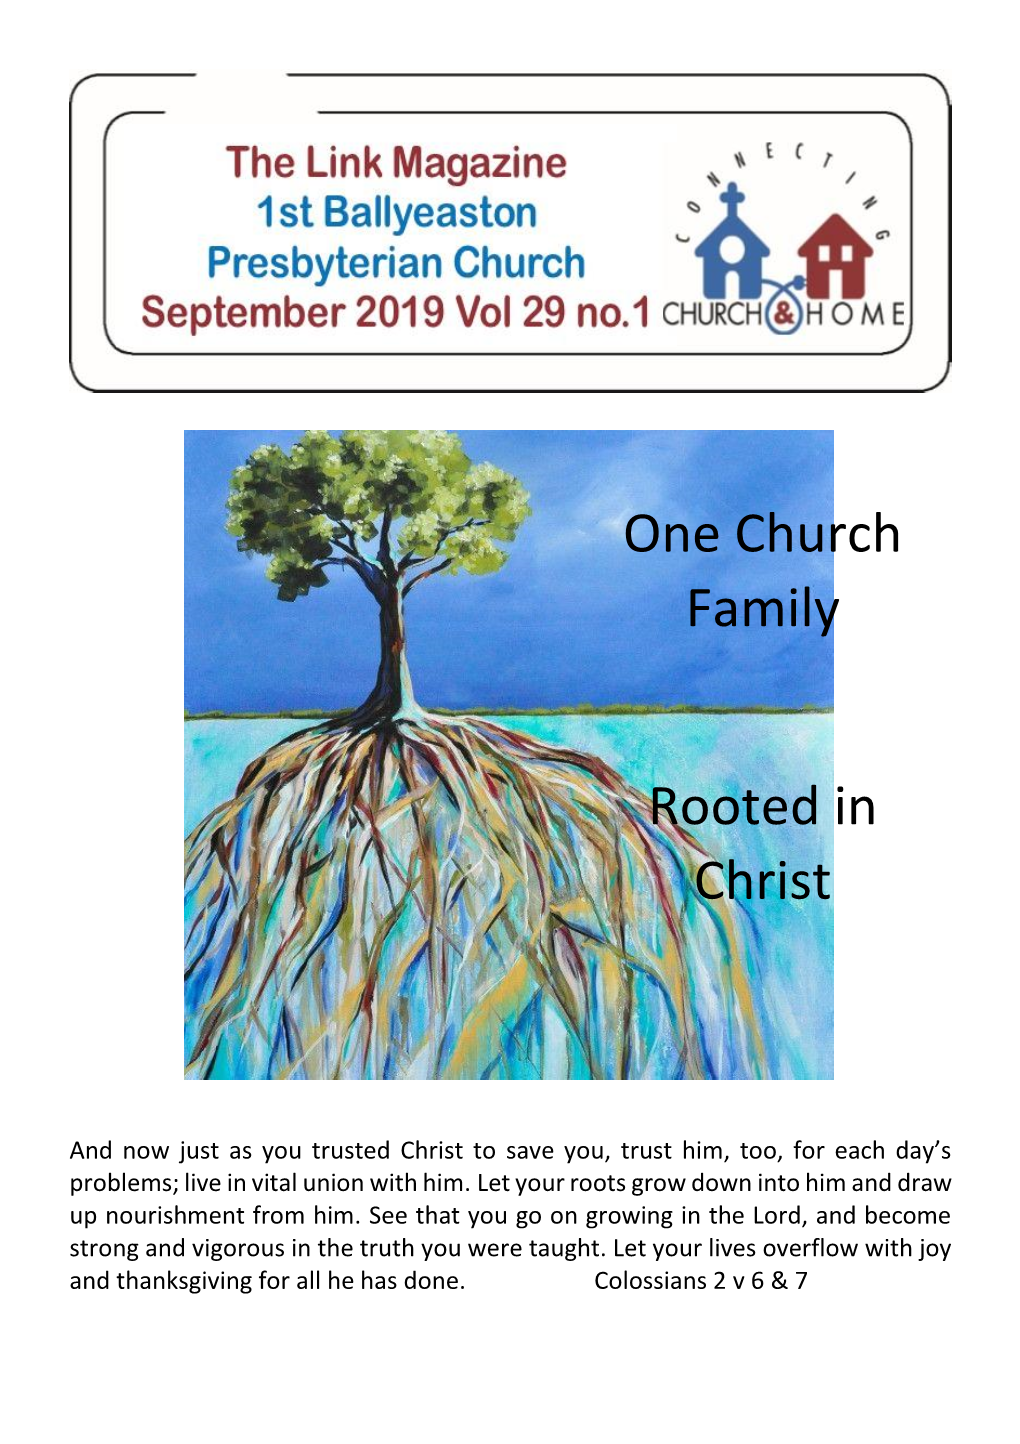 One Church Family Rooted in Christ